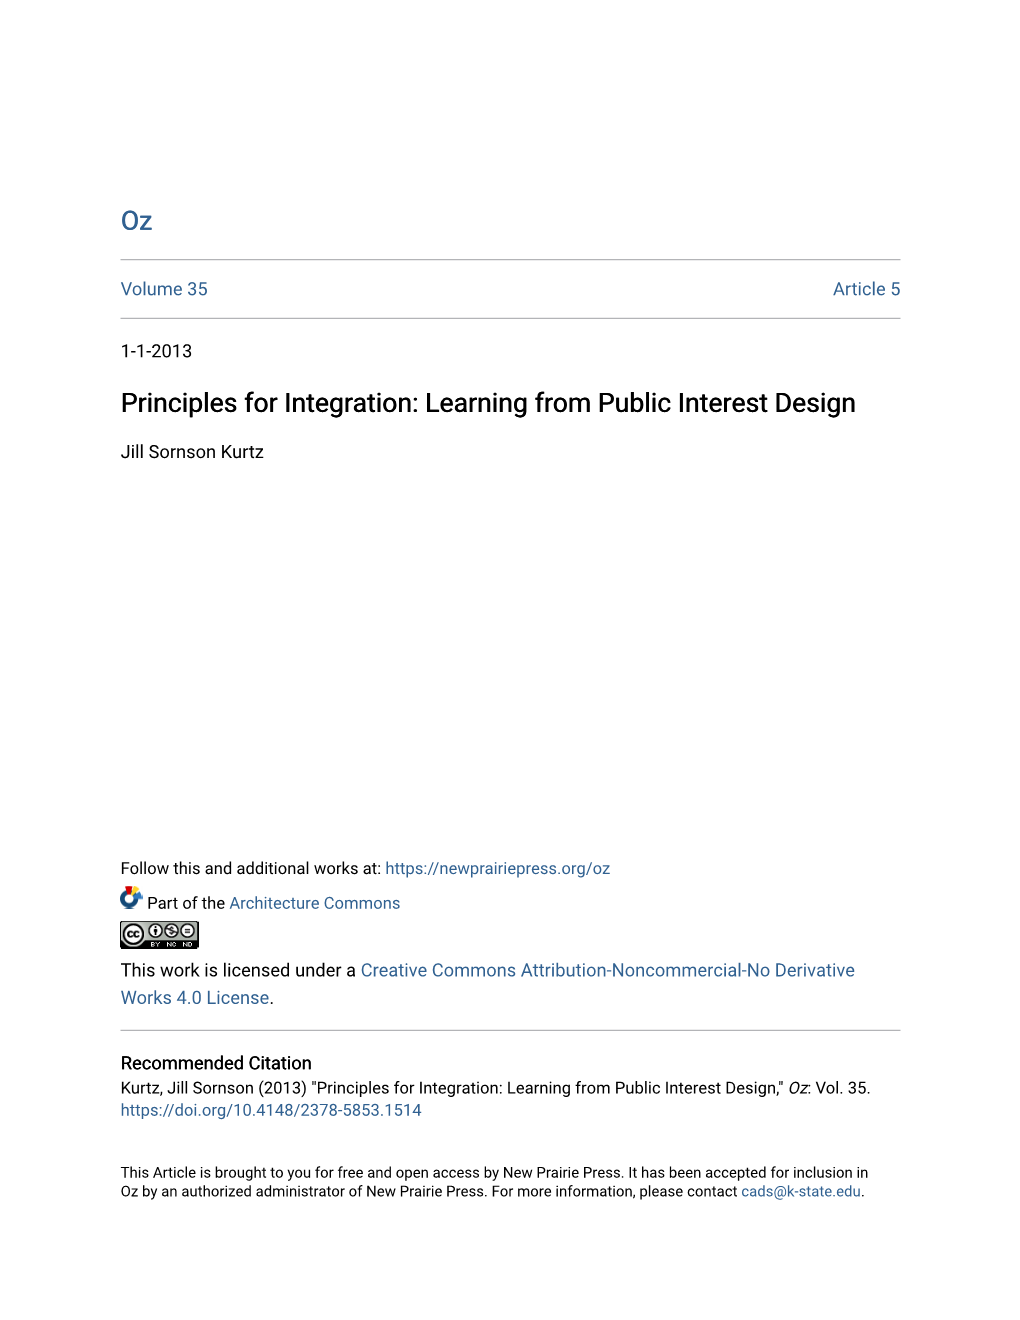 Principles for Integration: Learning from Public Interest Design